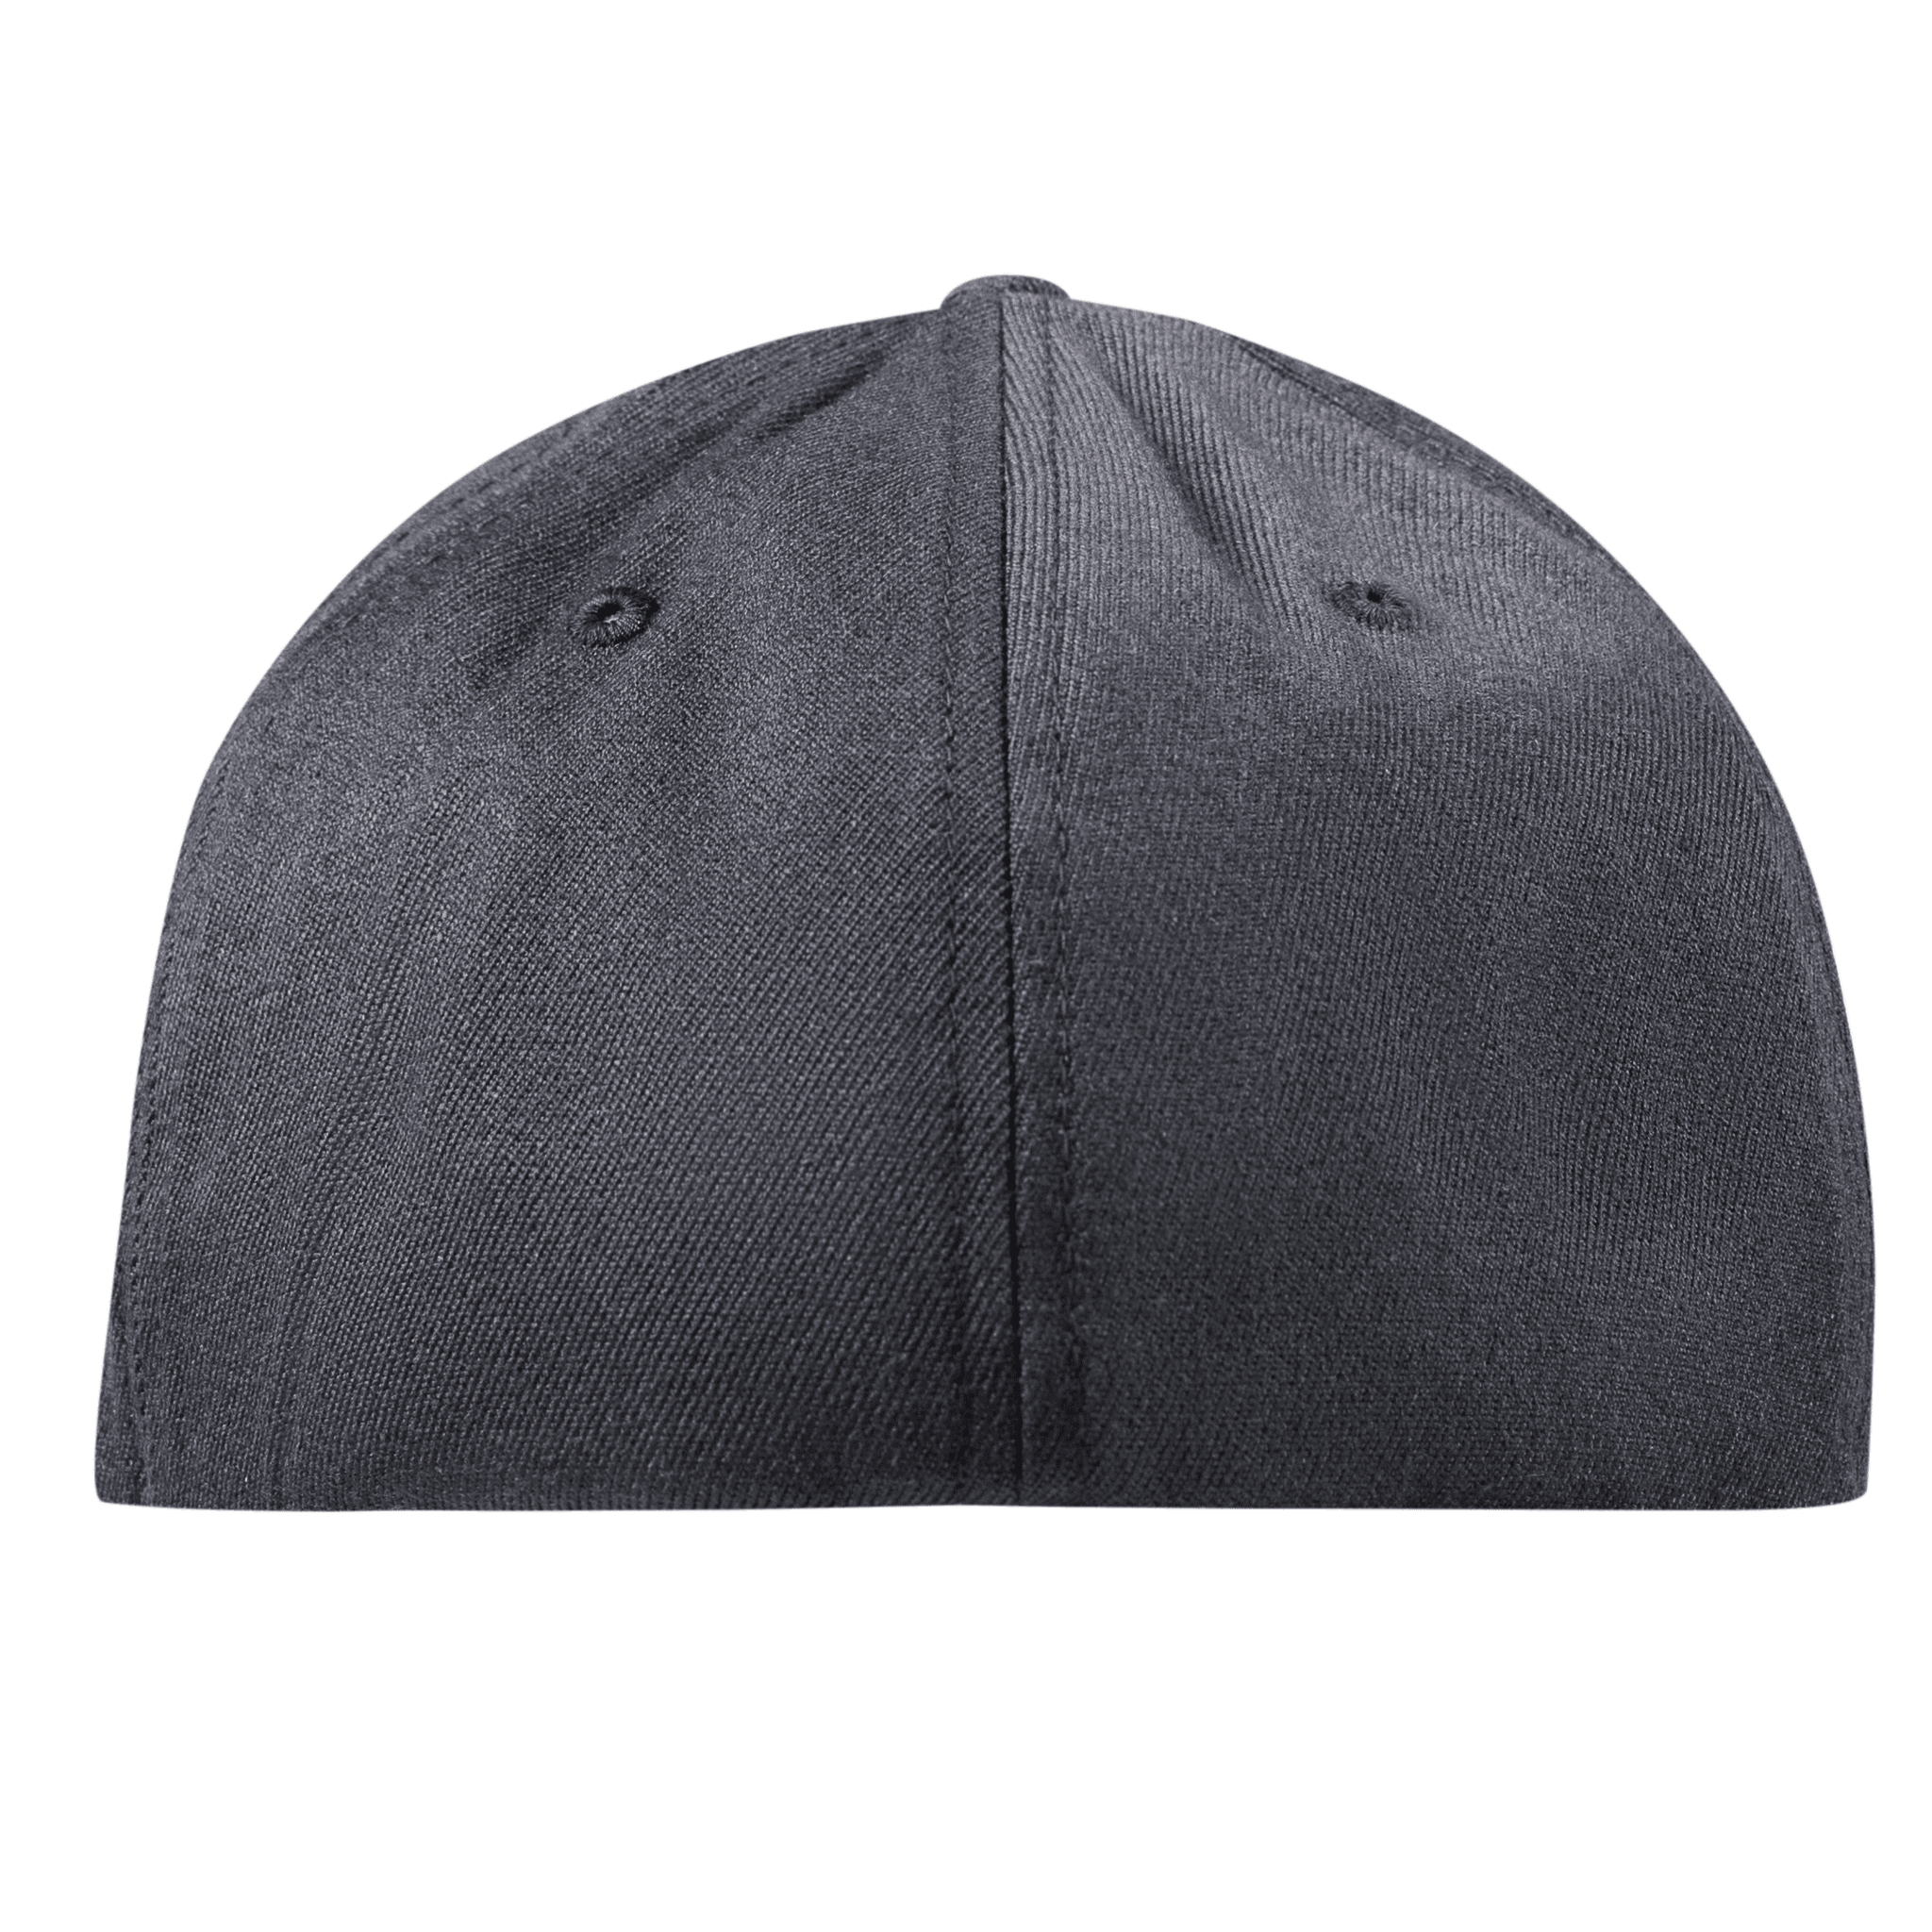 California Patriot Flexfit Fitted Back Charcoal